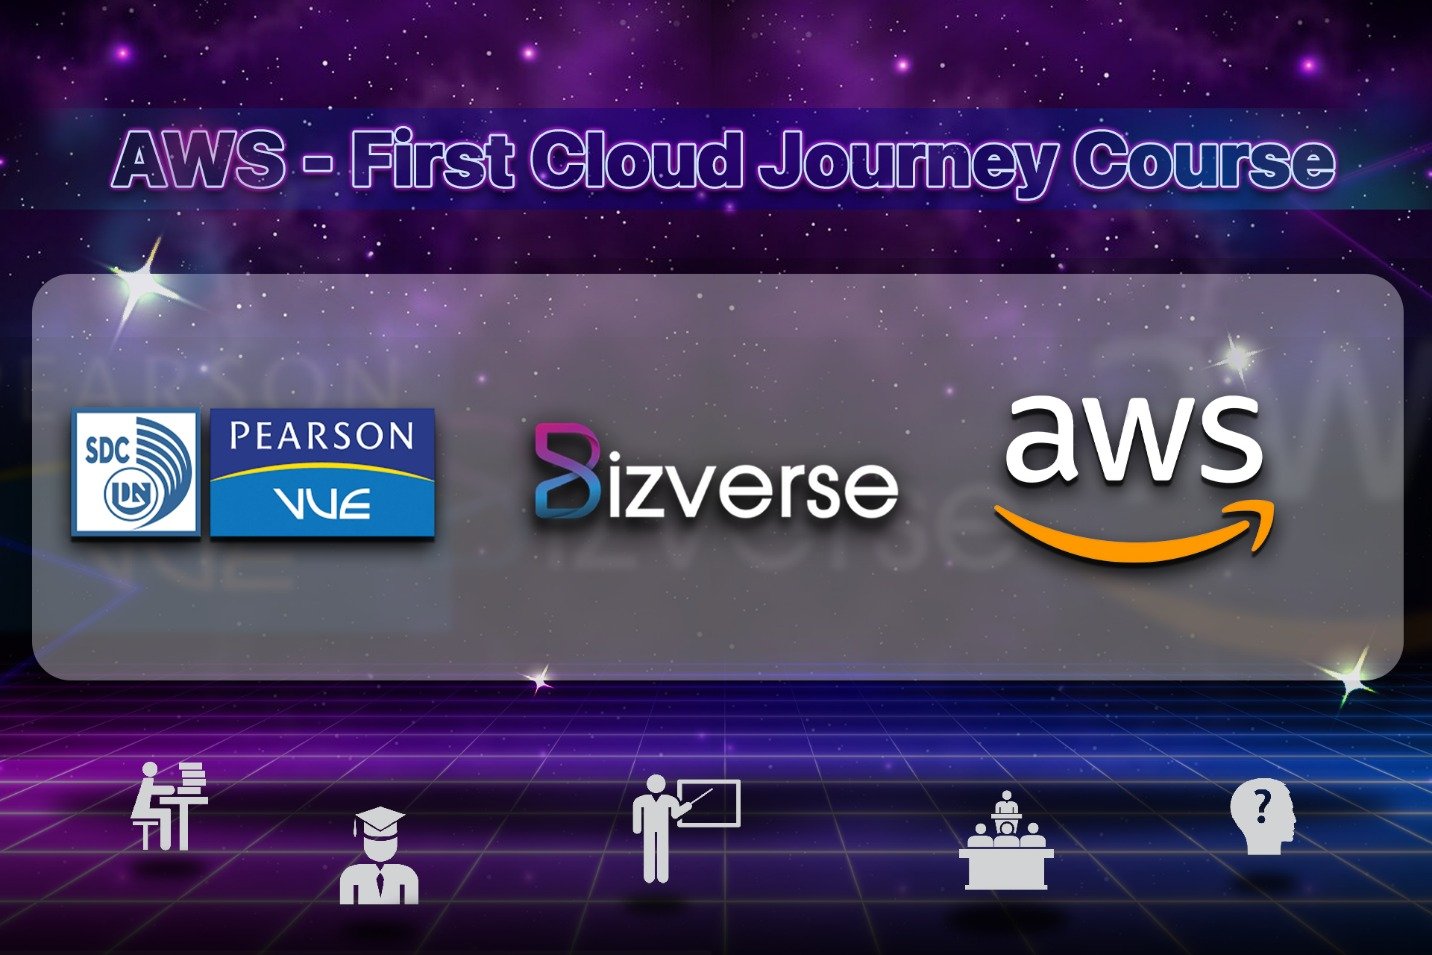 FREE AWS FIRST CLOUD JOURNEY COURSE FOR LEARNER